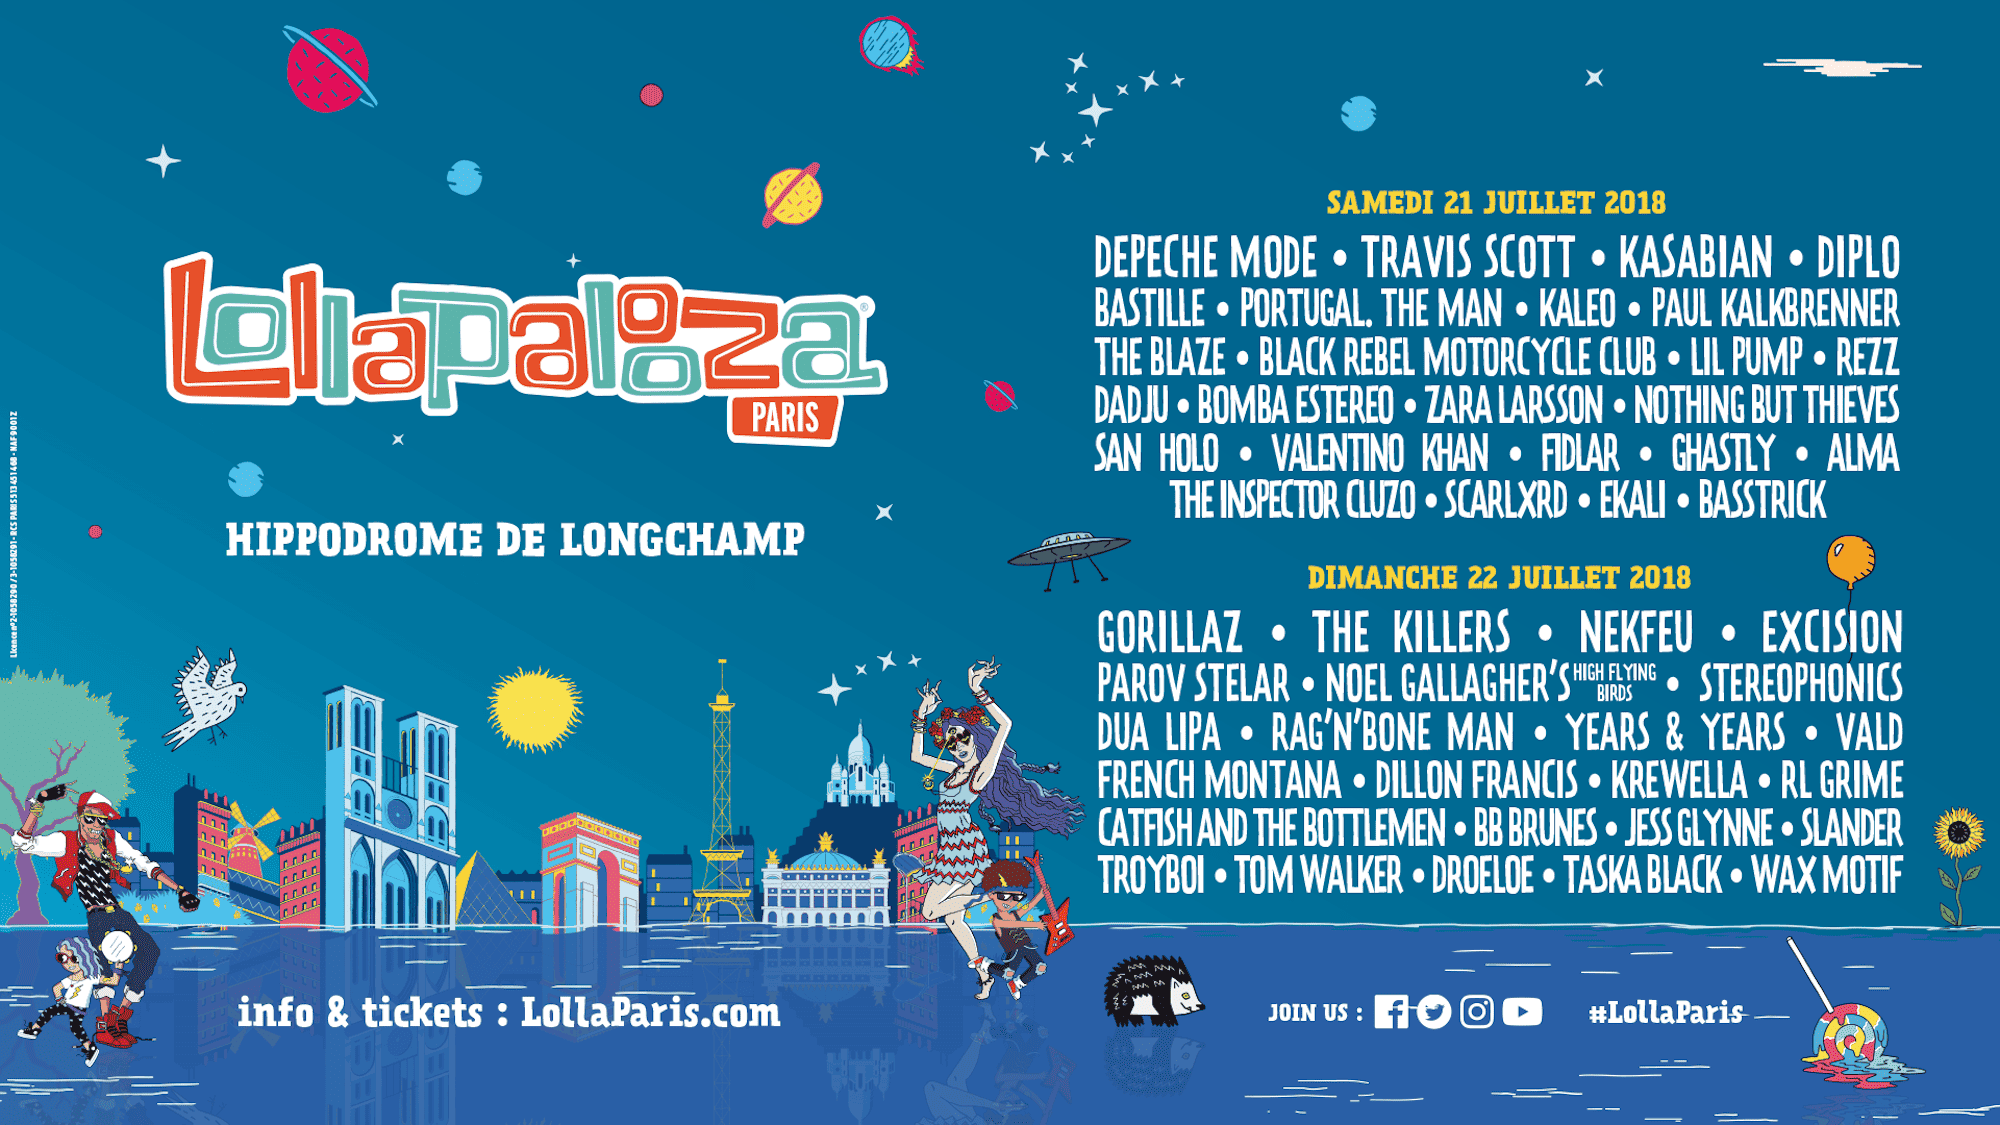 HiP Paris Blog rounds up what's on in Paris this July like the summer festival Lollapalooza.